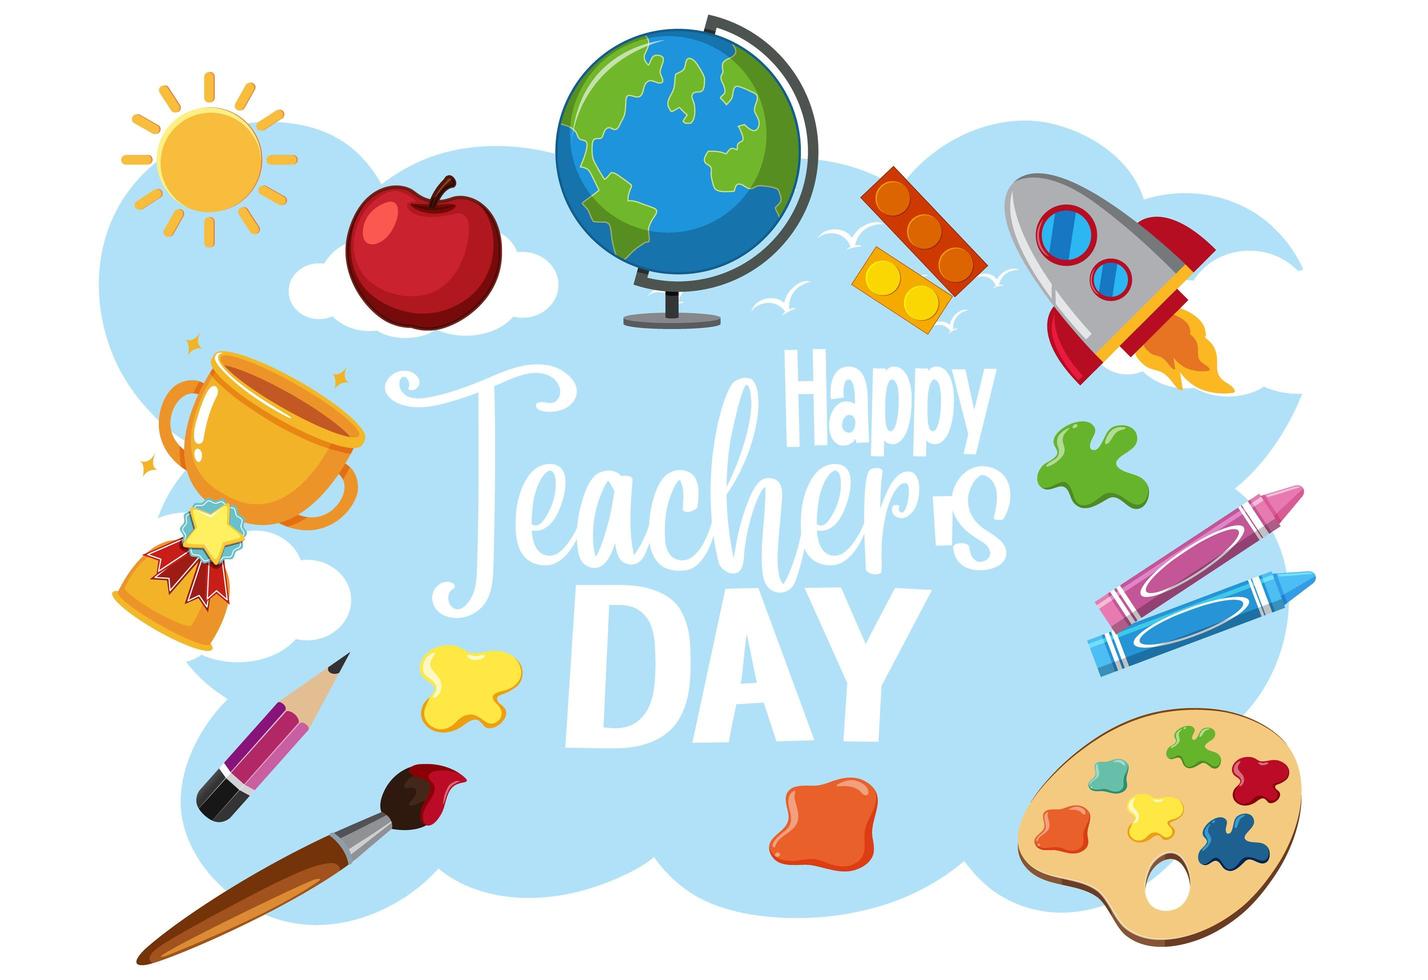 Happy World Teacher's Day logo with student items vector